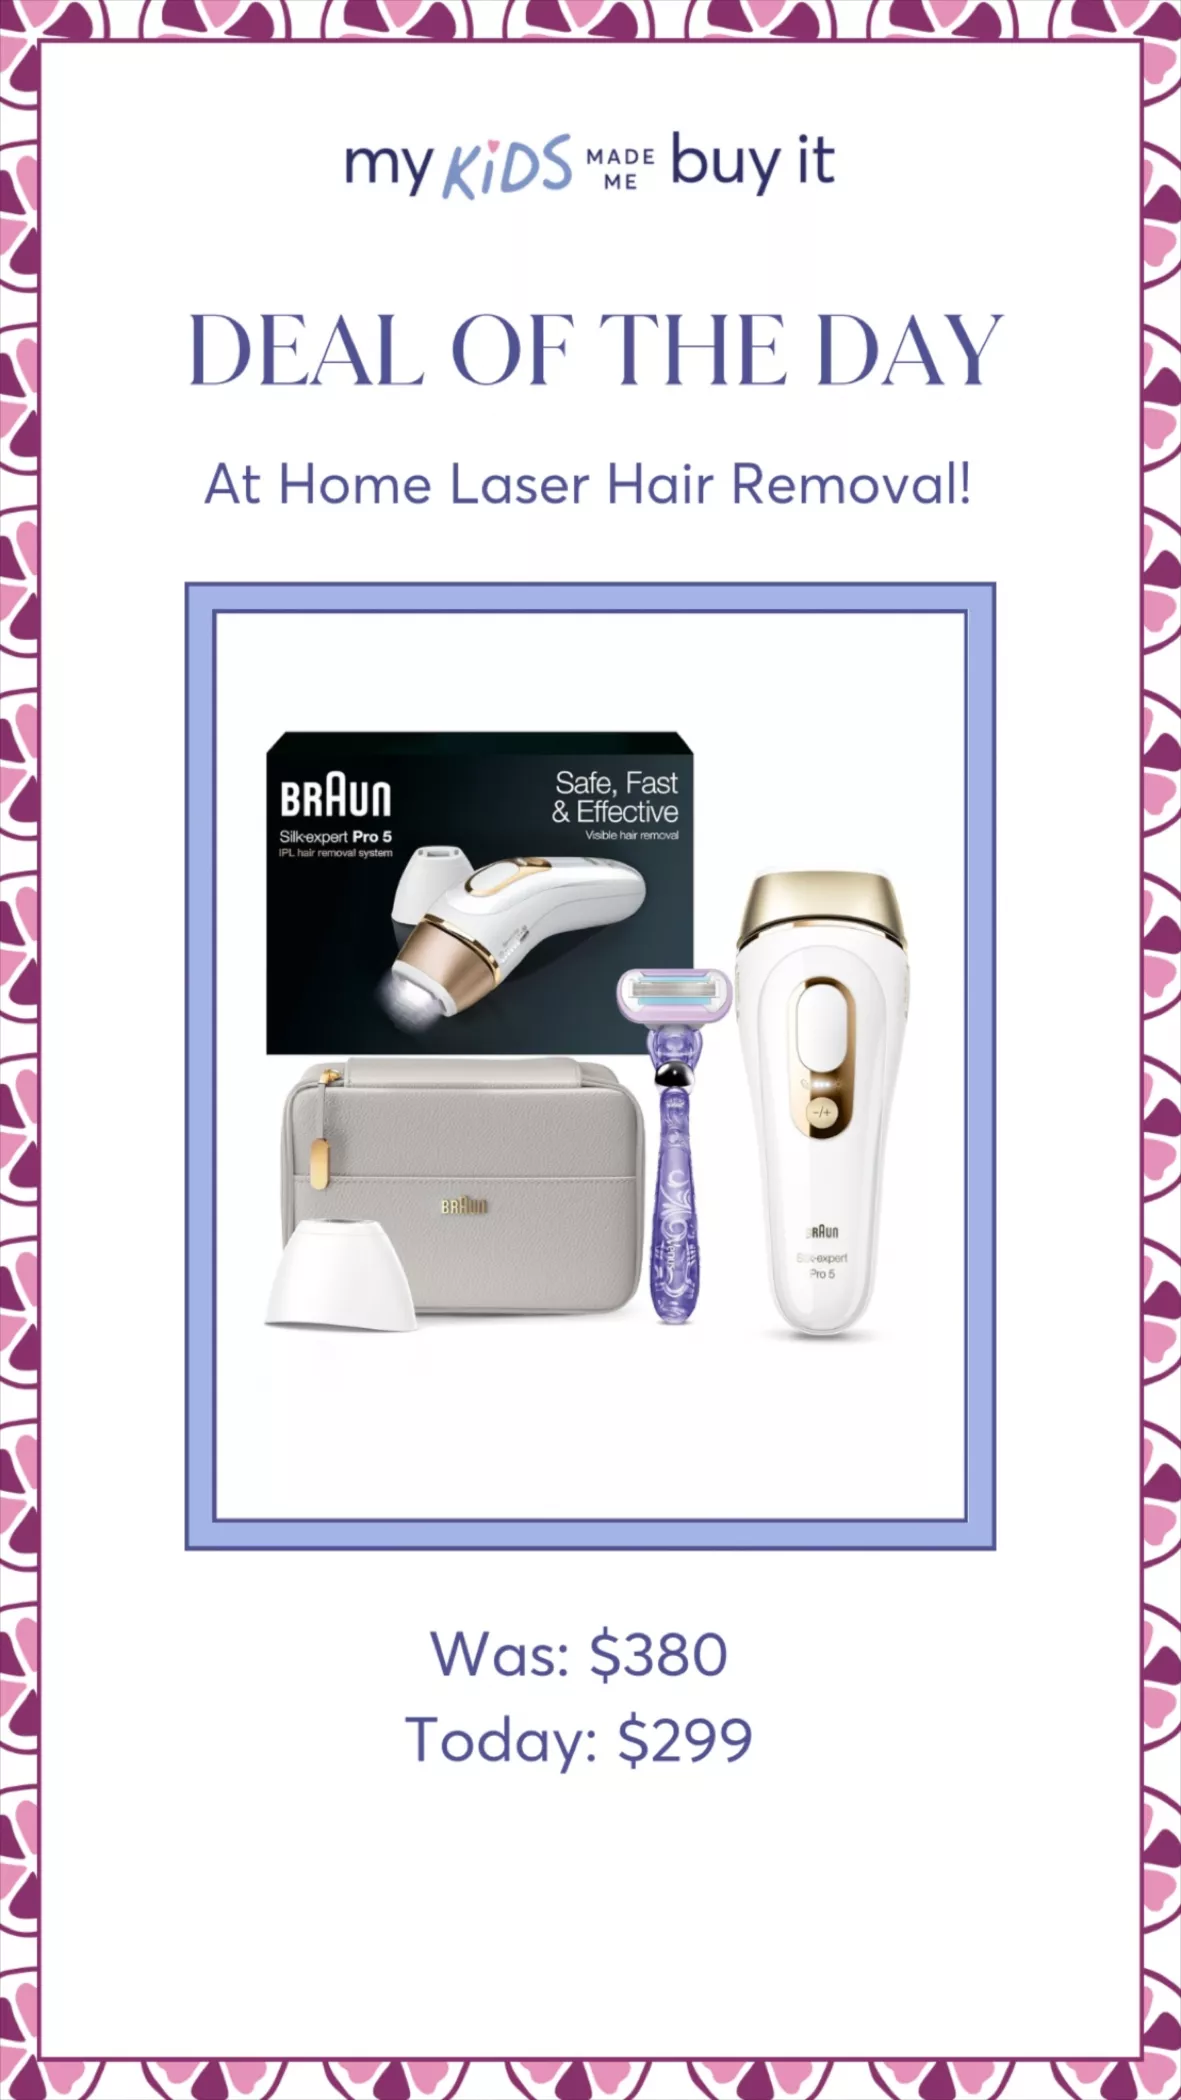  Braun IPL Long Lasting Laser Hair Removal Device for